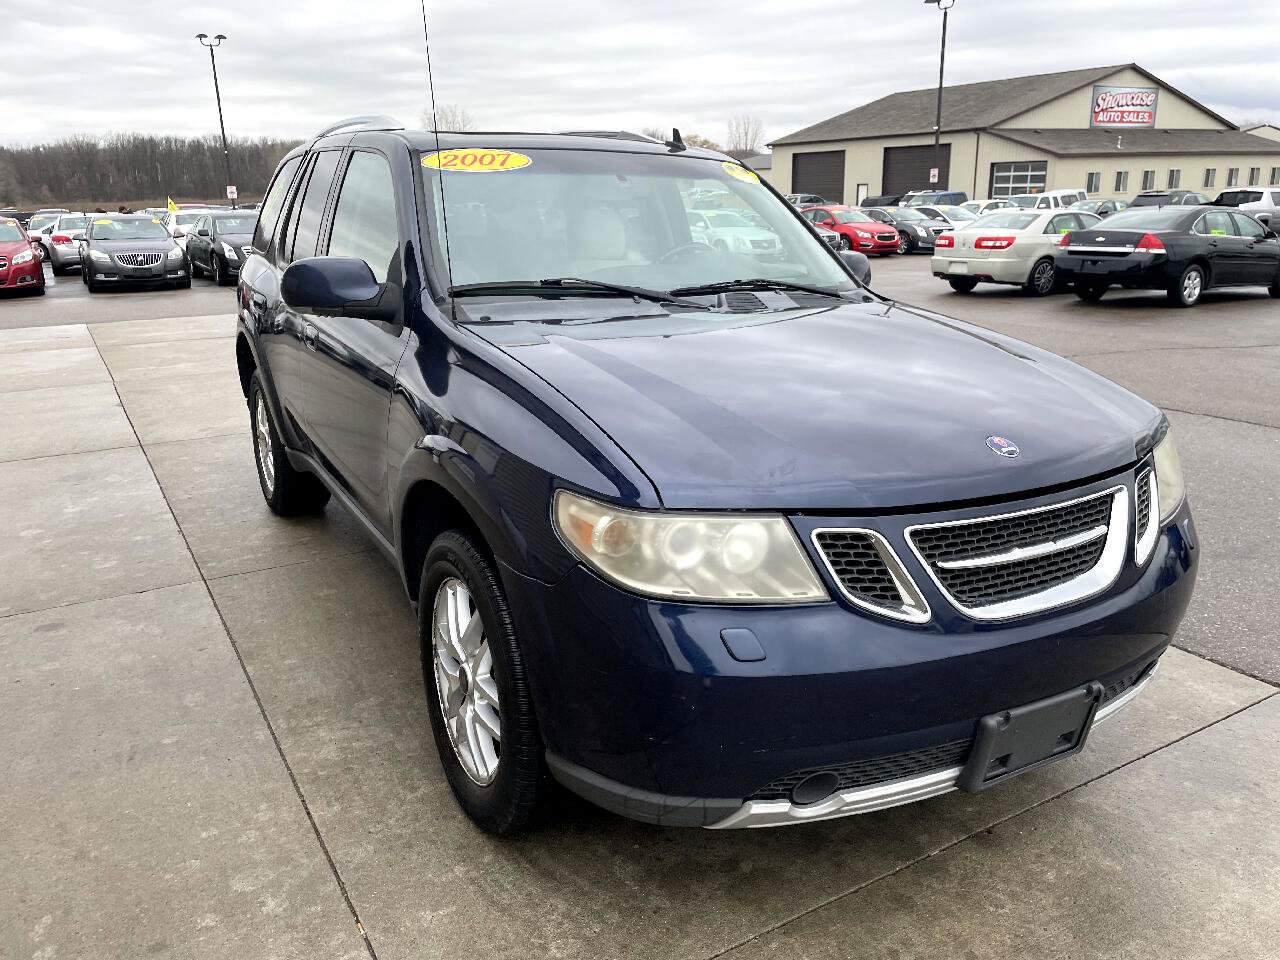 Used Saab 9-7X for Sale Right Now - Autotrader